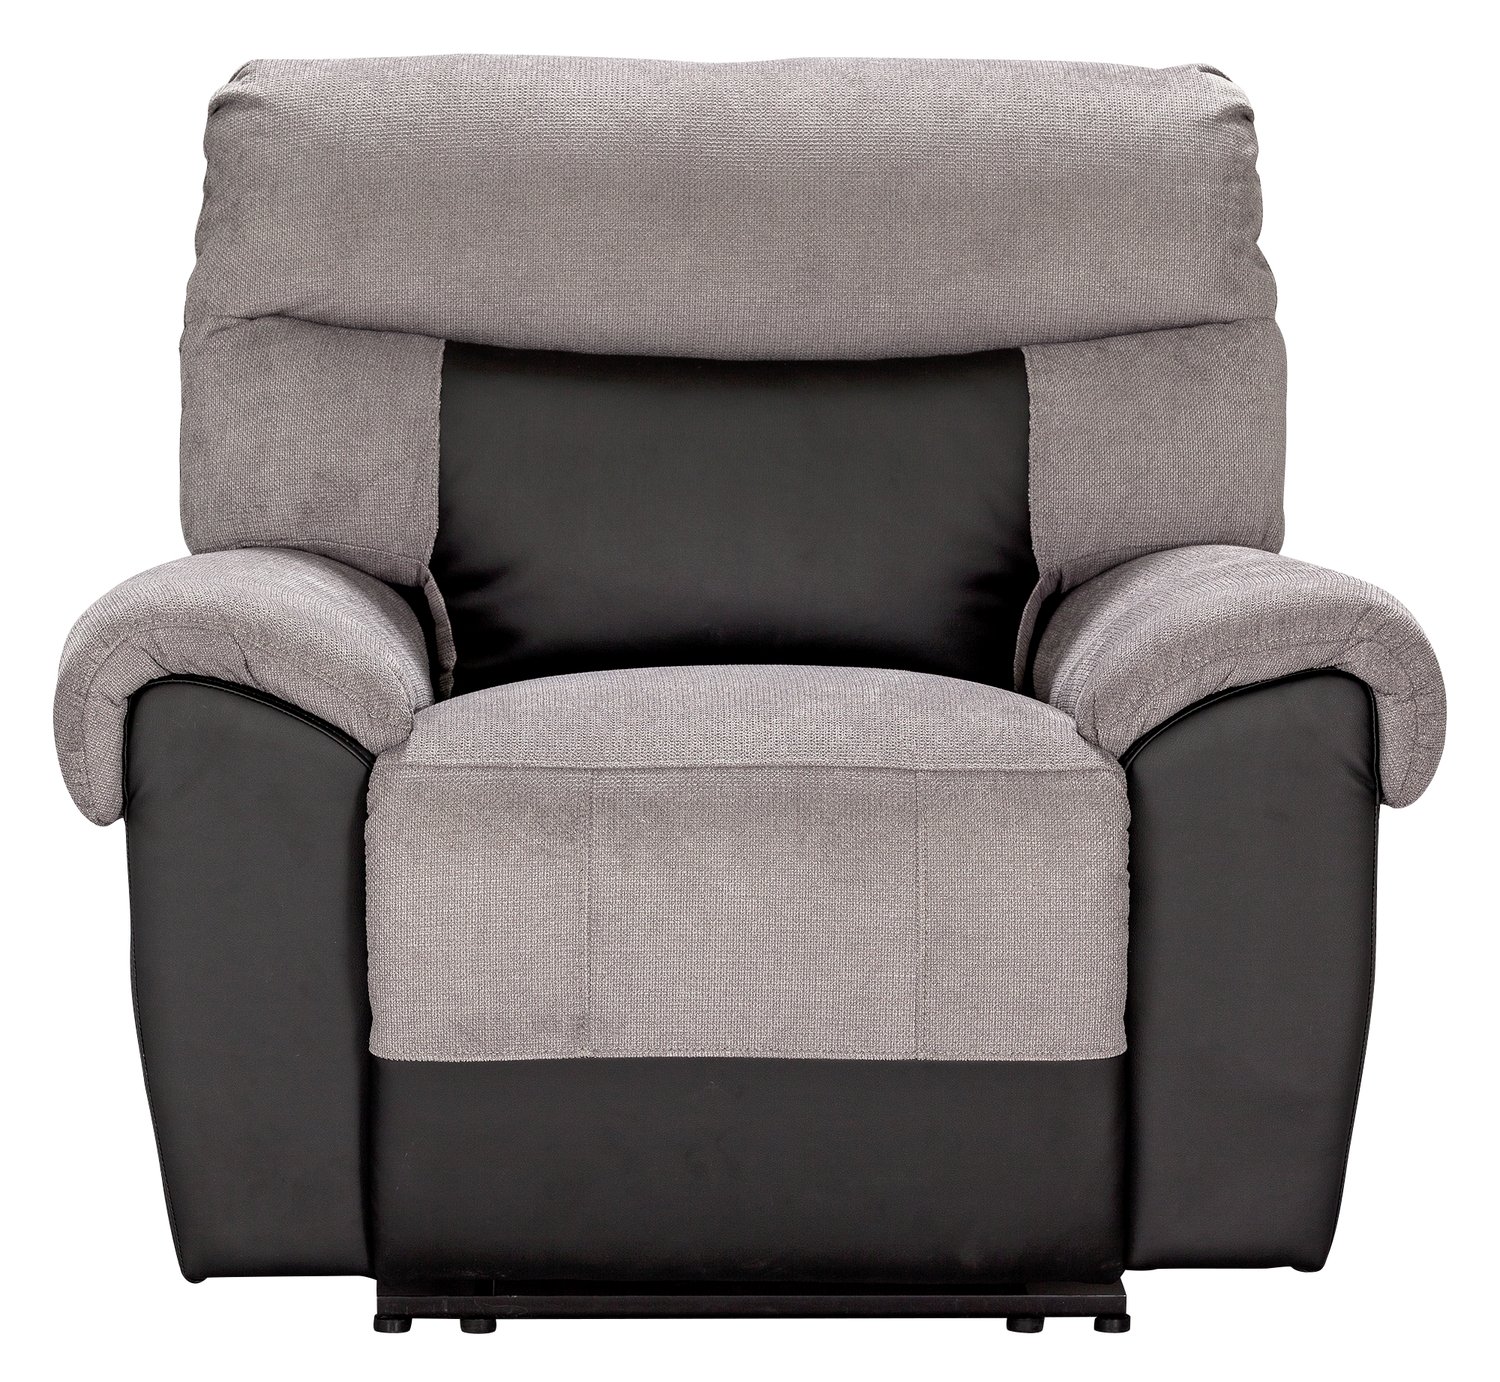 Argos Home Henry Fabric Recliner Chair - Charcoal (8379465) | Argos